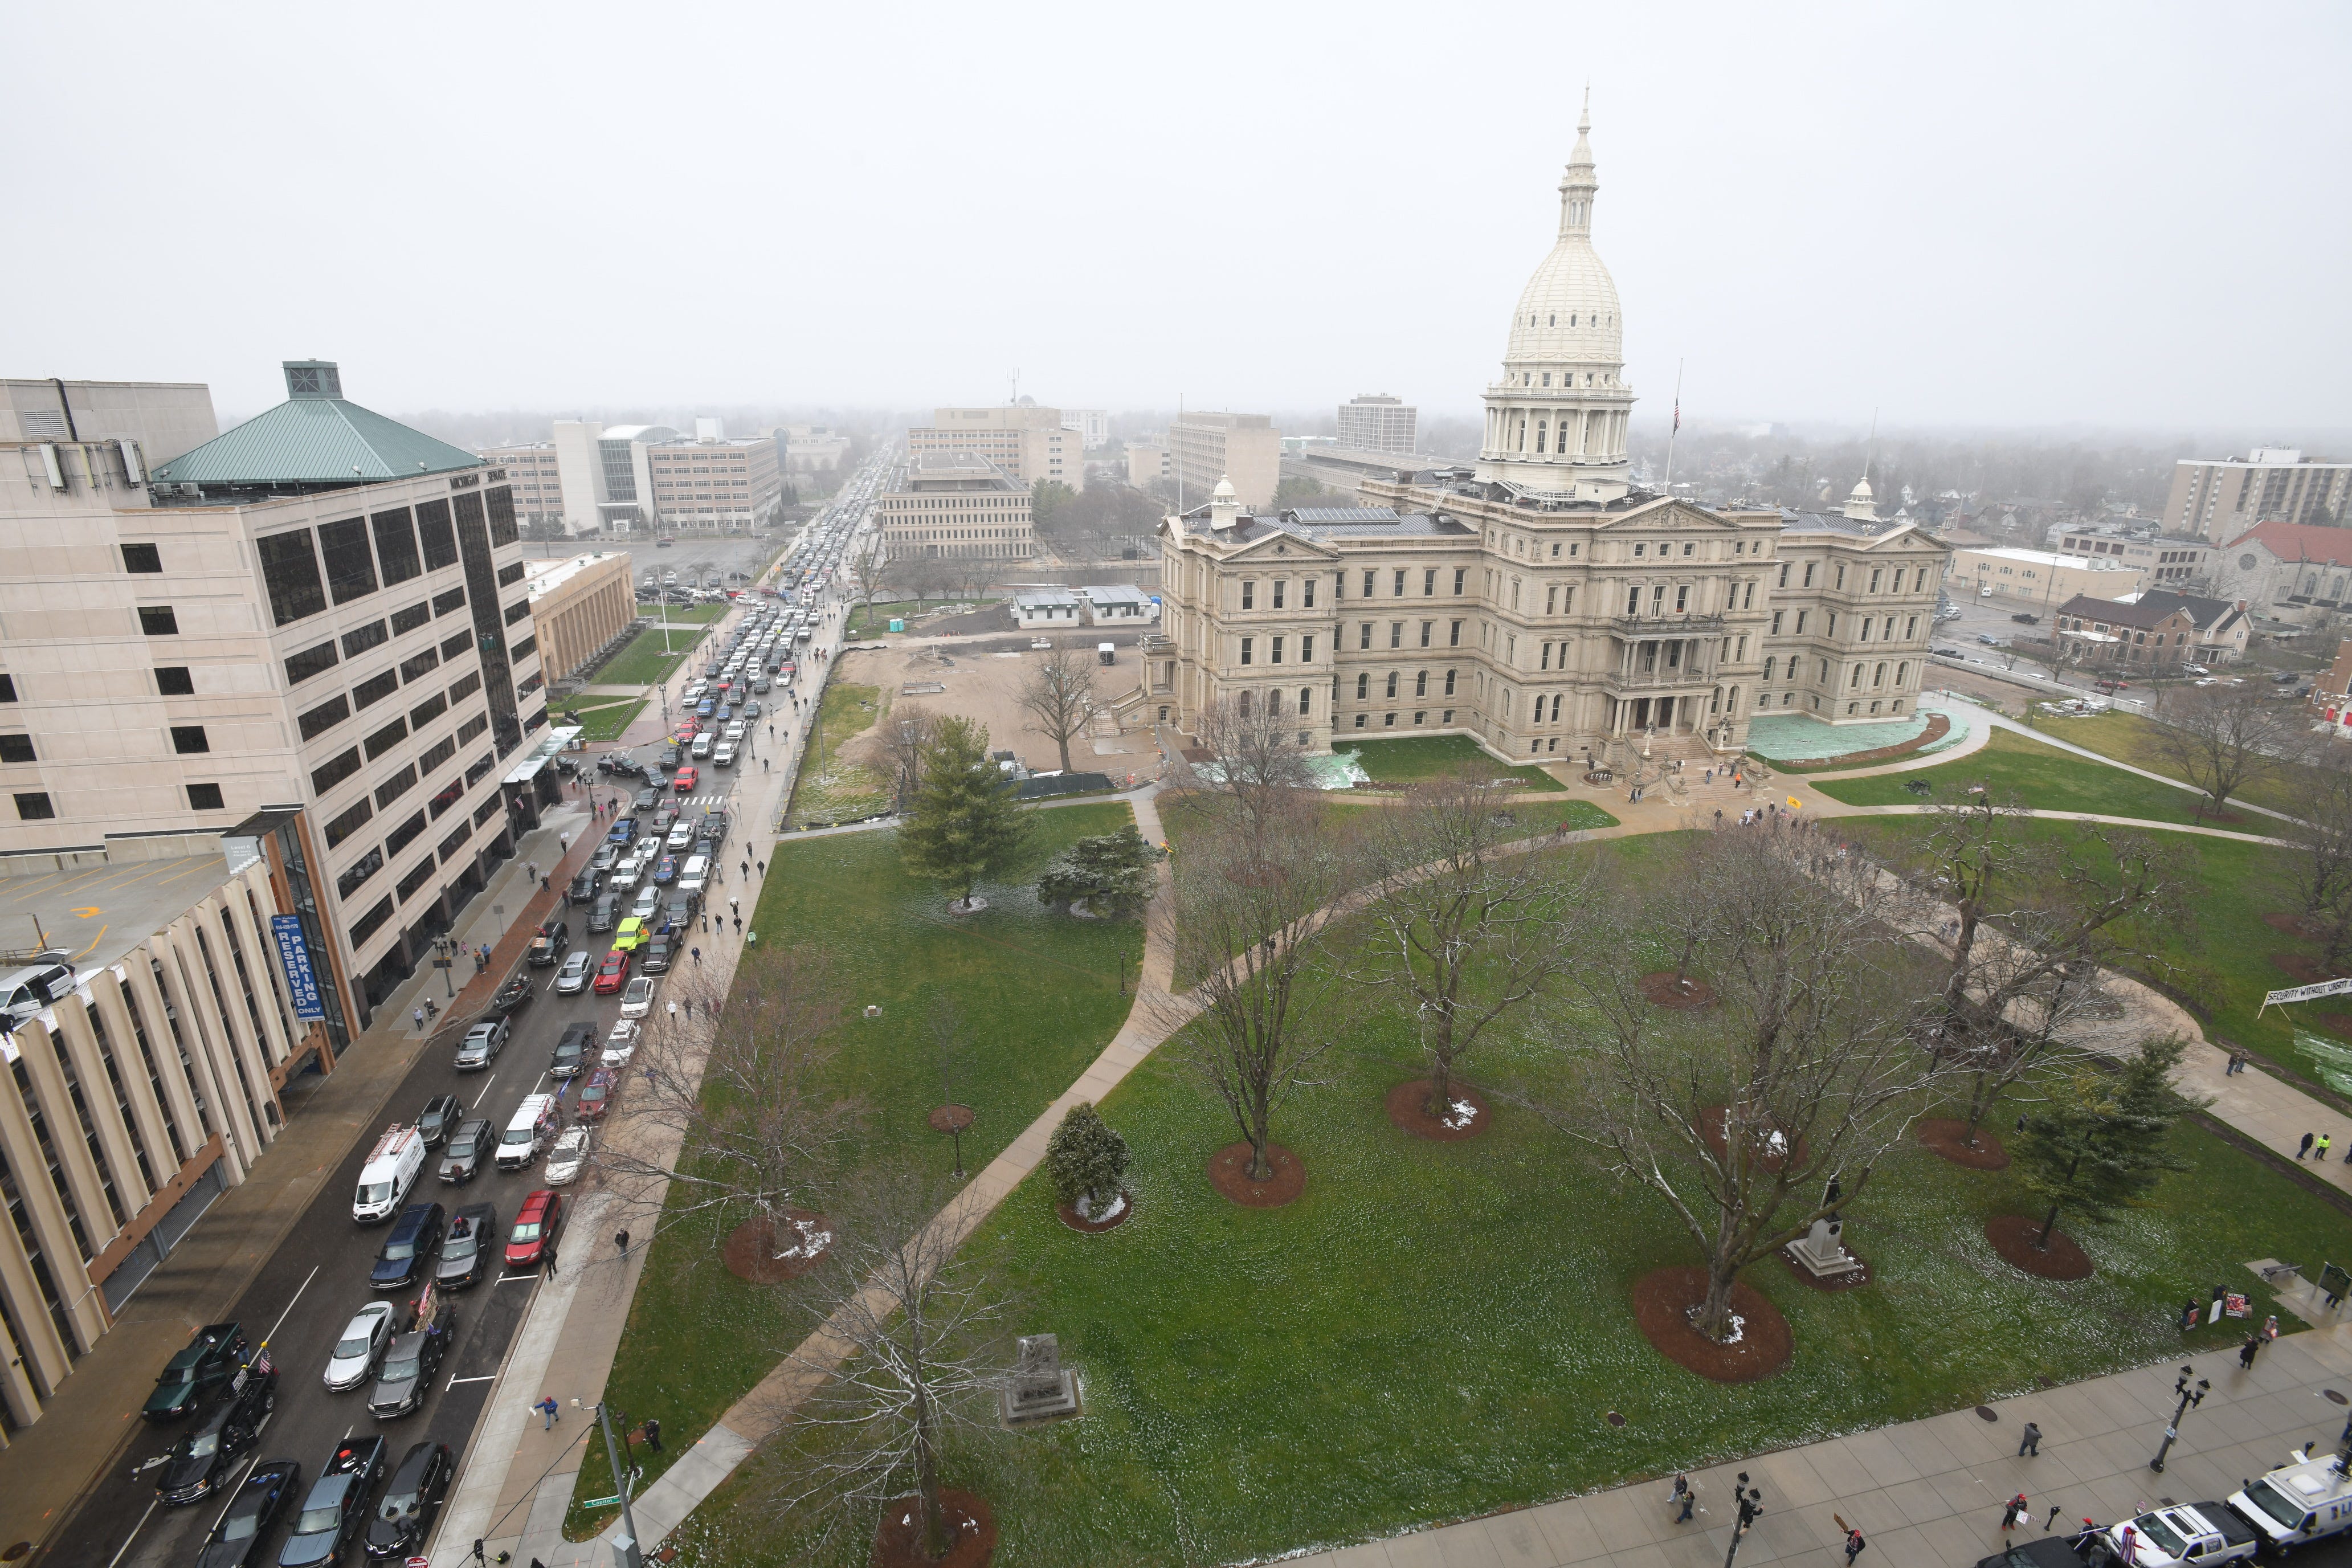 Hundreds of vehicles driven by individuals protesting Gov. Gretchen Whitmer ' s stay-home order jam the streets near the state Capitol building in Lansing, honking their horns and raising a ruckus before the official protest is even set to begin at noon on Wednesday, April 15, 2020.